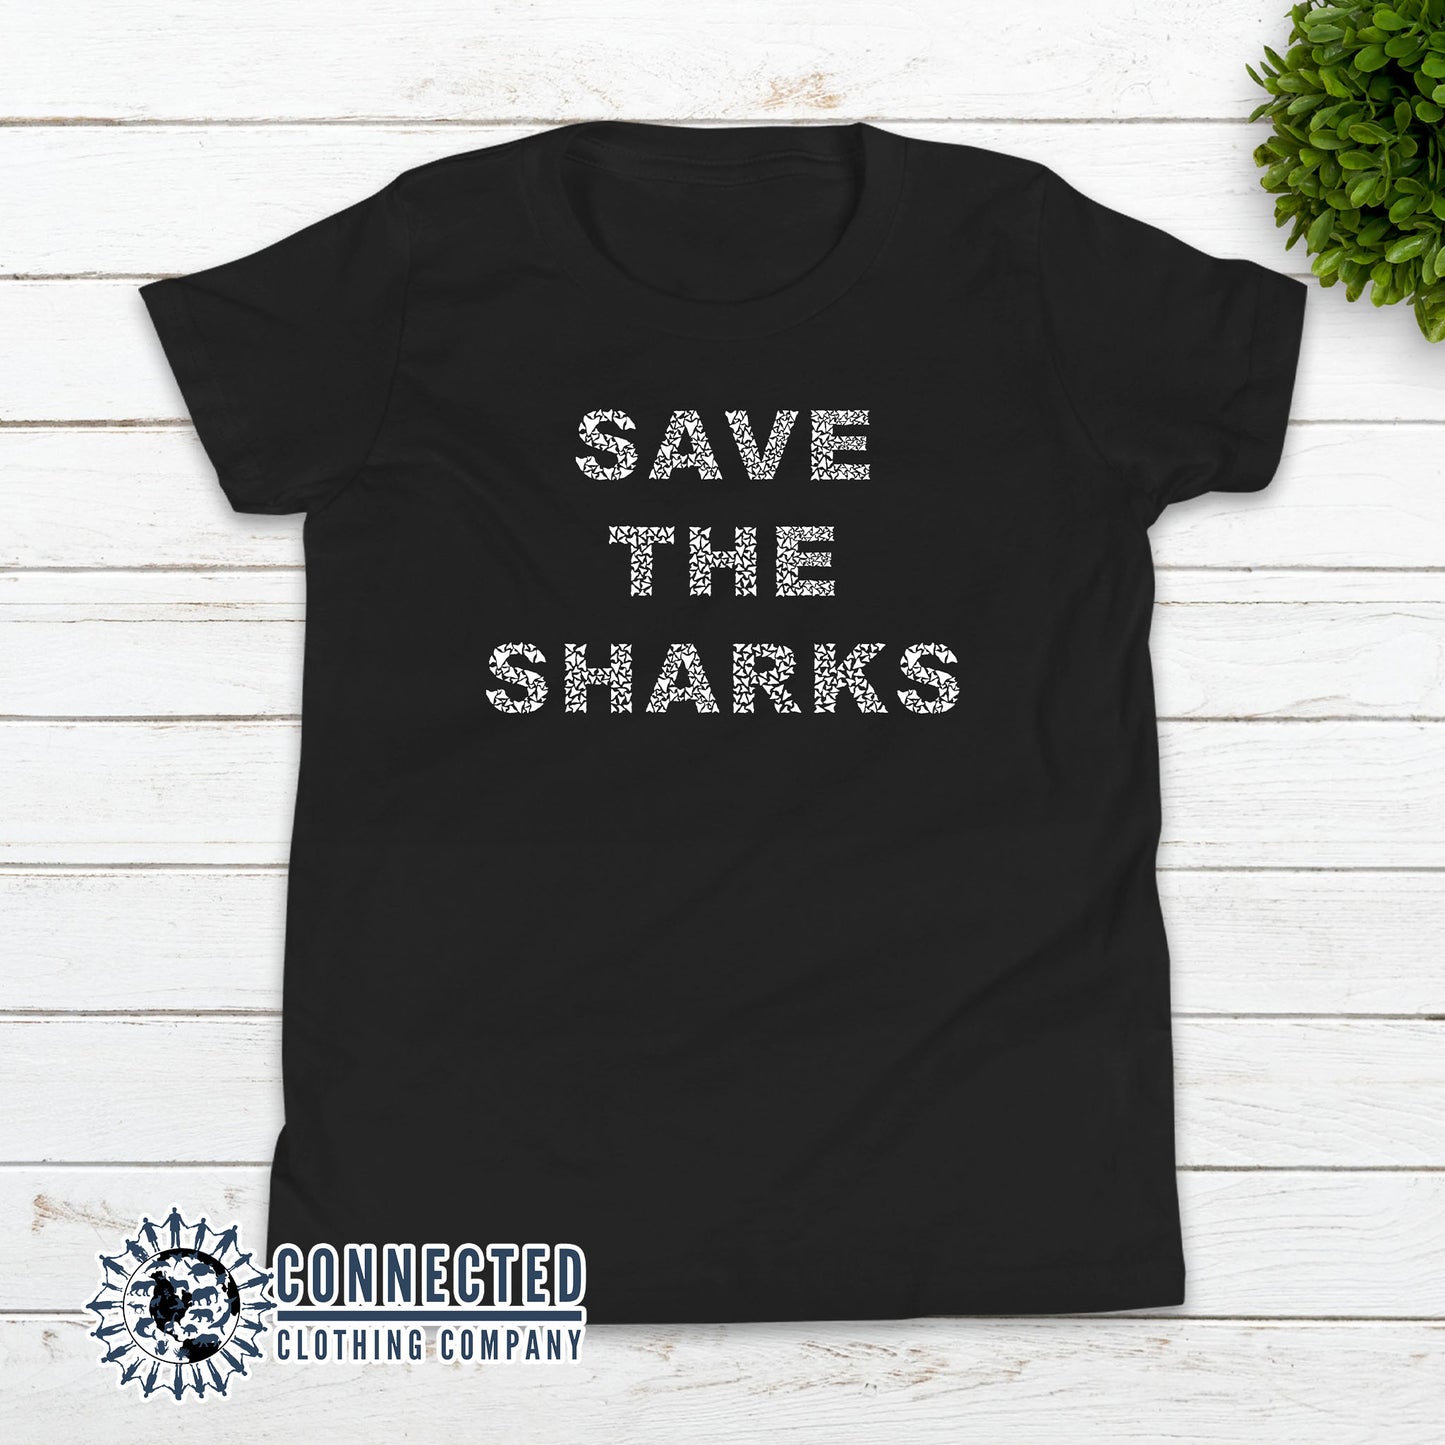 Black Save The Sharks Youth Short-Sleeve Tee - Connected Clothing Company - 10% of profits donated to Oceana shark conservation